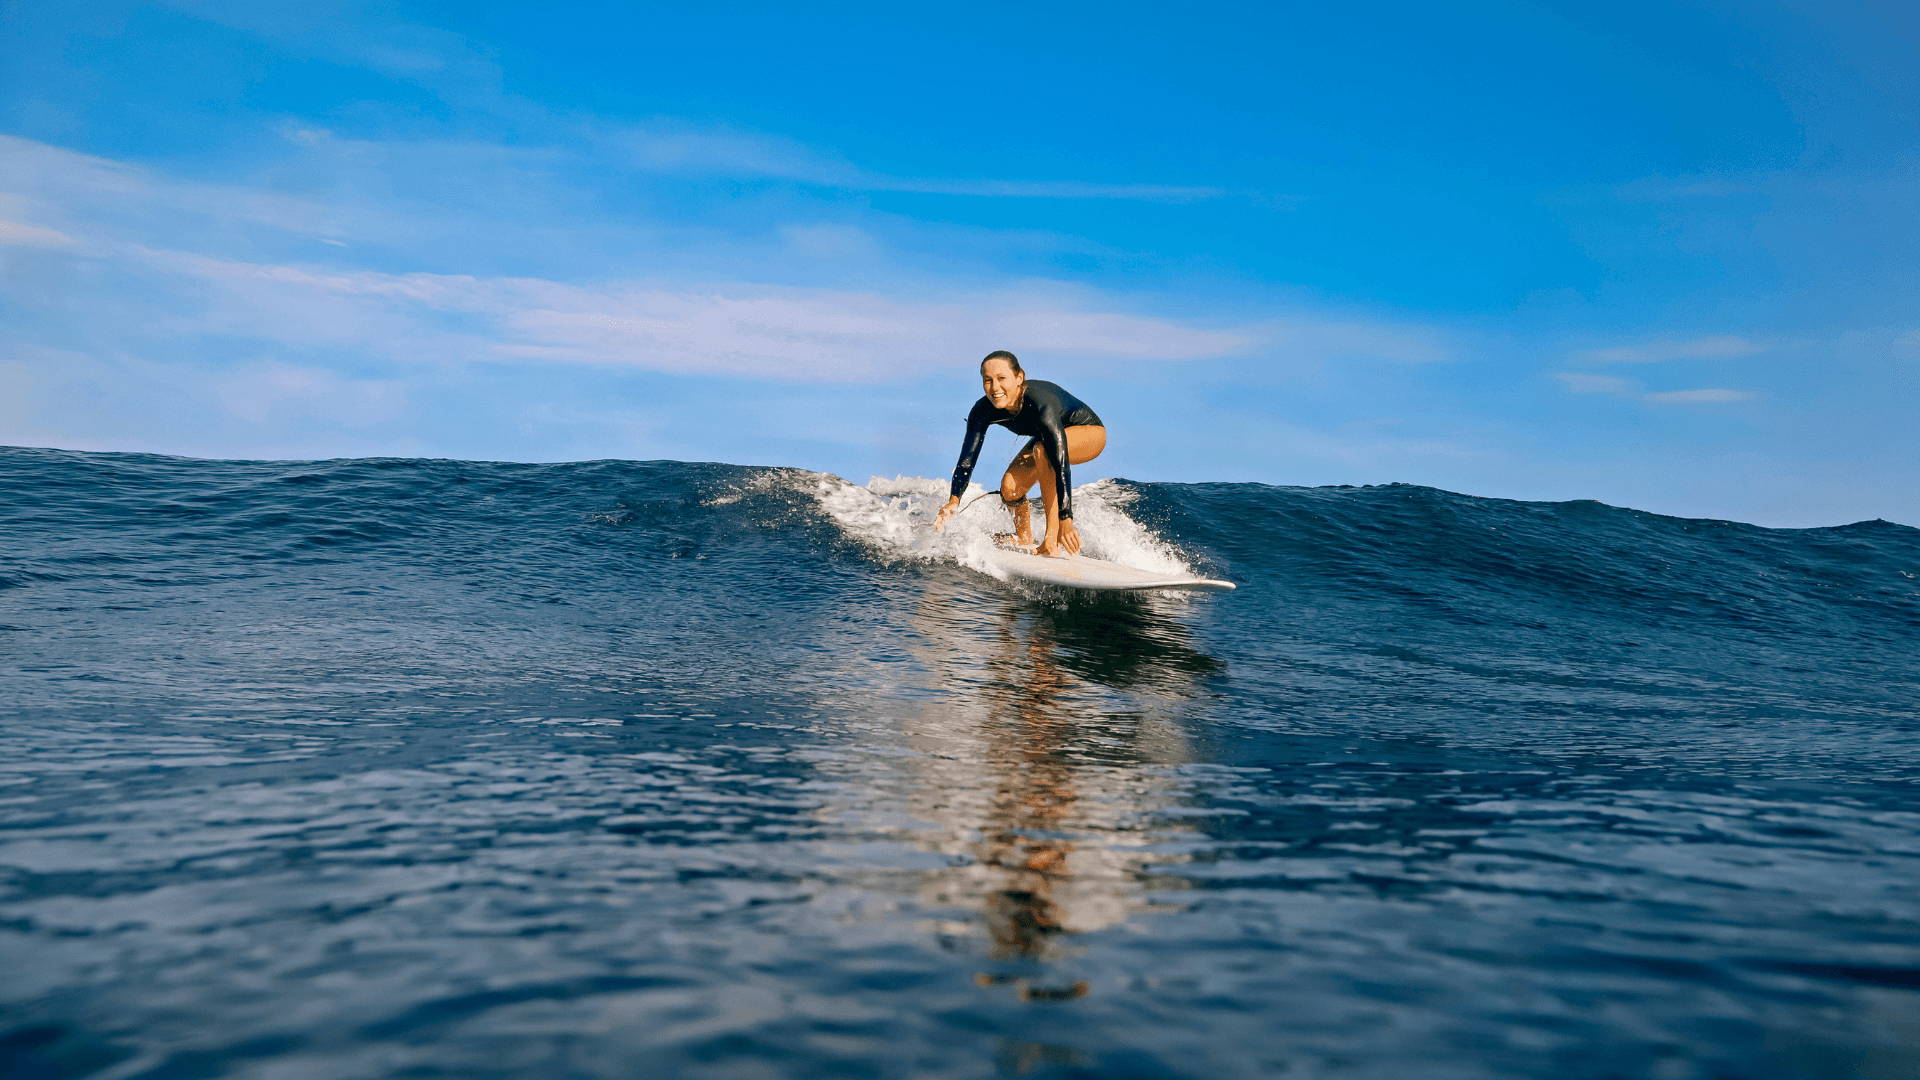 Best Locations for the Solo Female Surfer